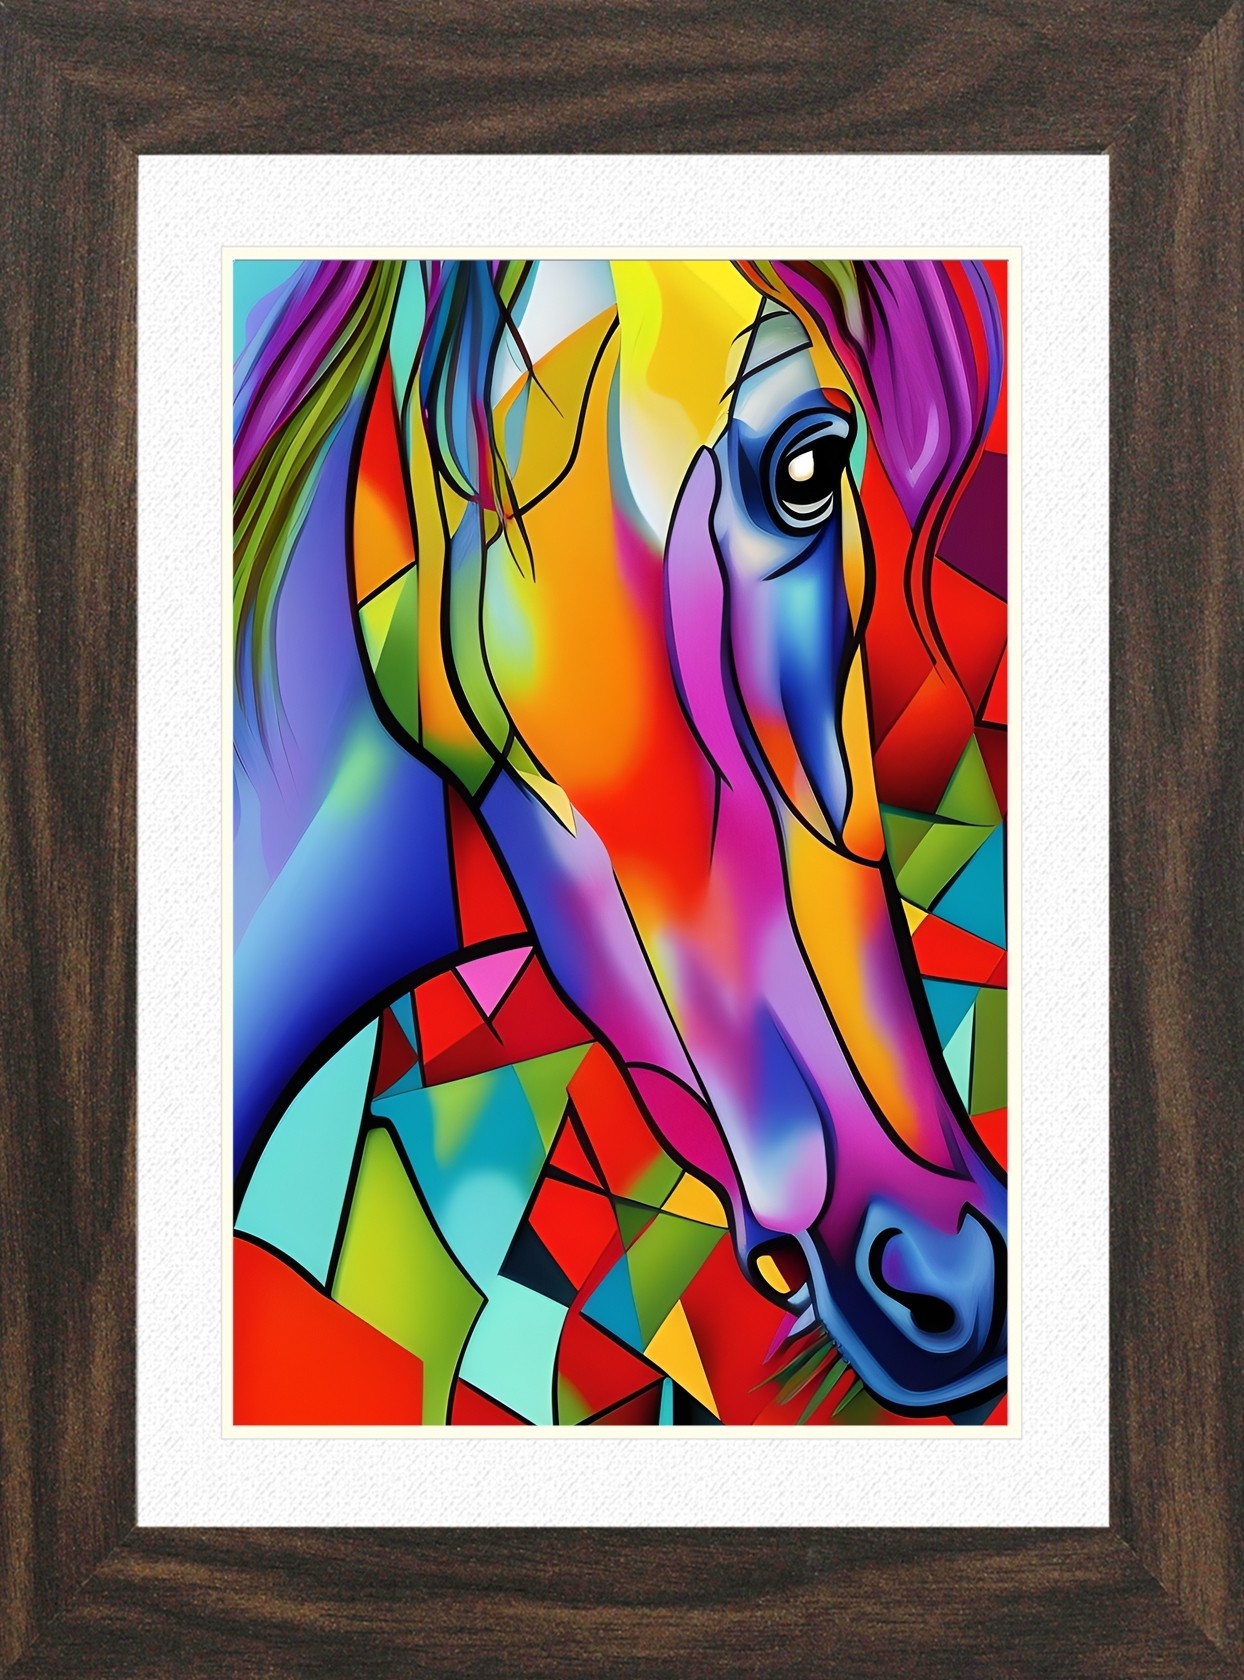 Horse Animal Picture Framed Colourful Abstract Art (30cm x 25cm Walnut Frame)